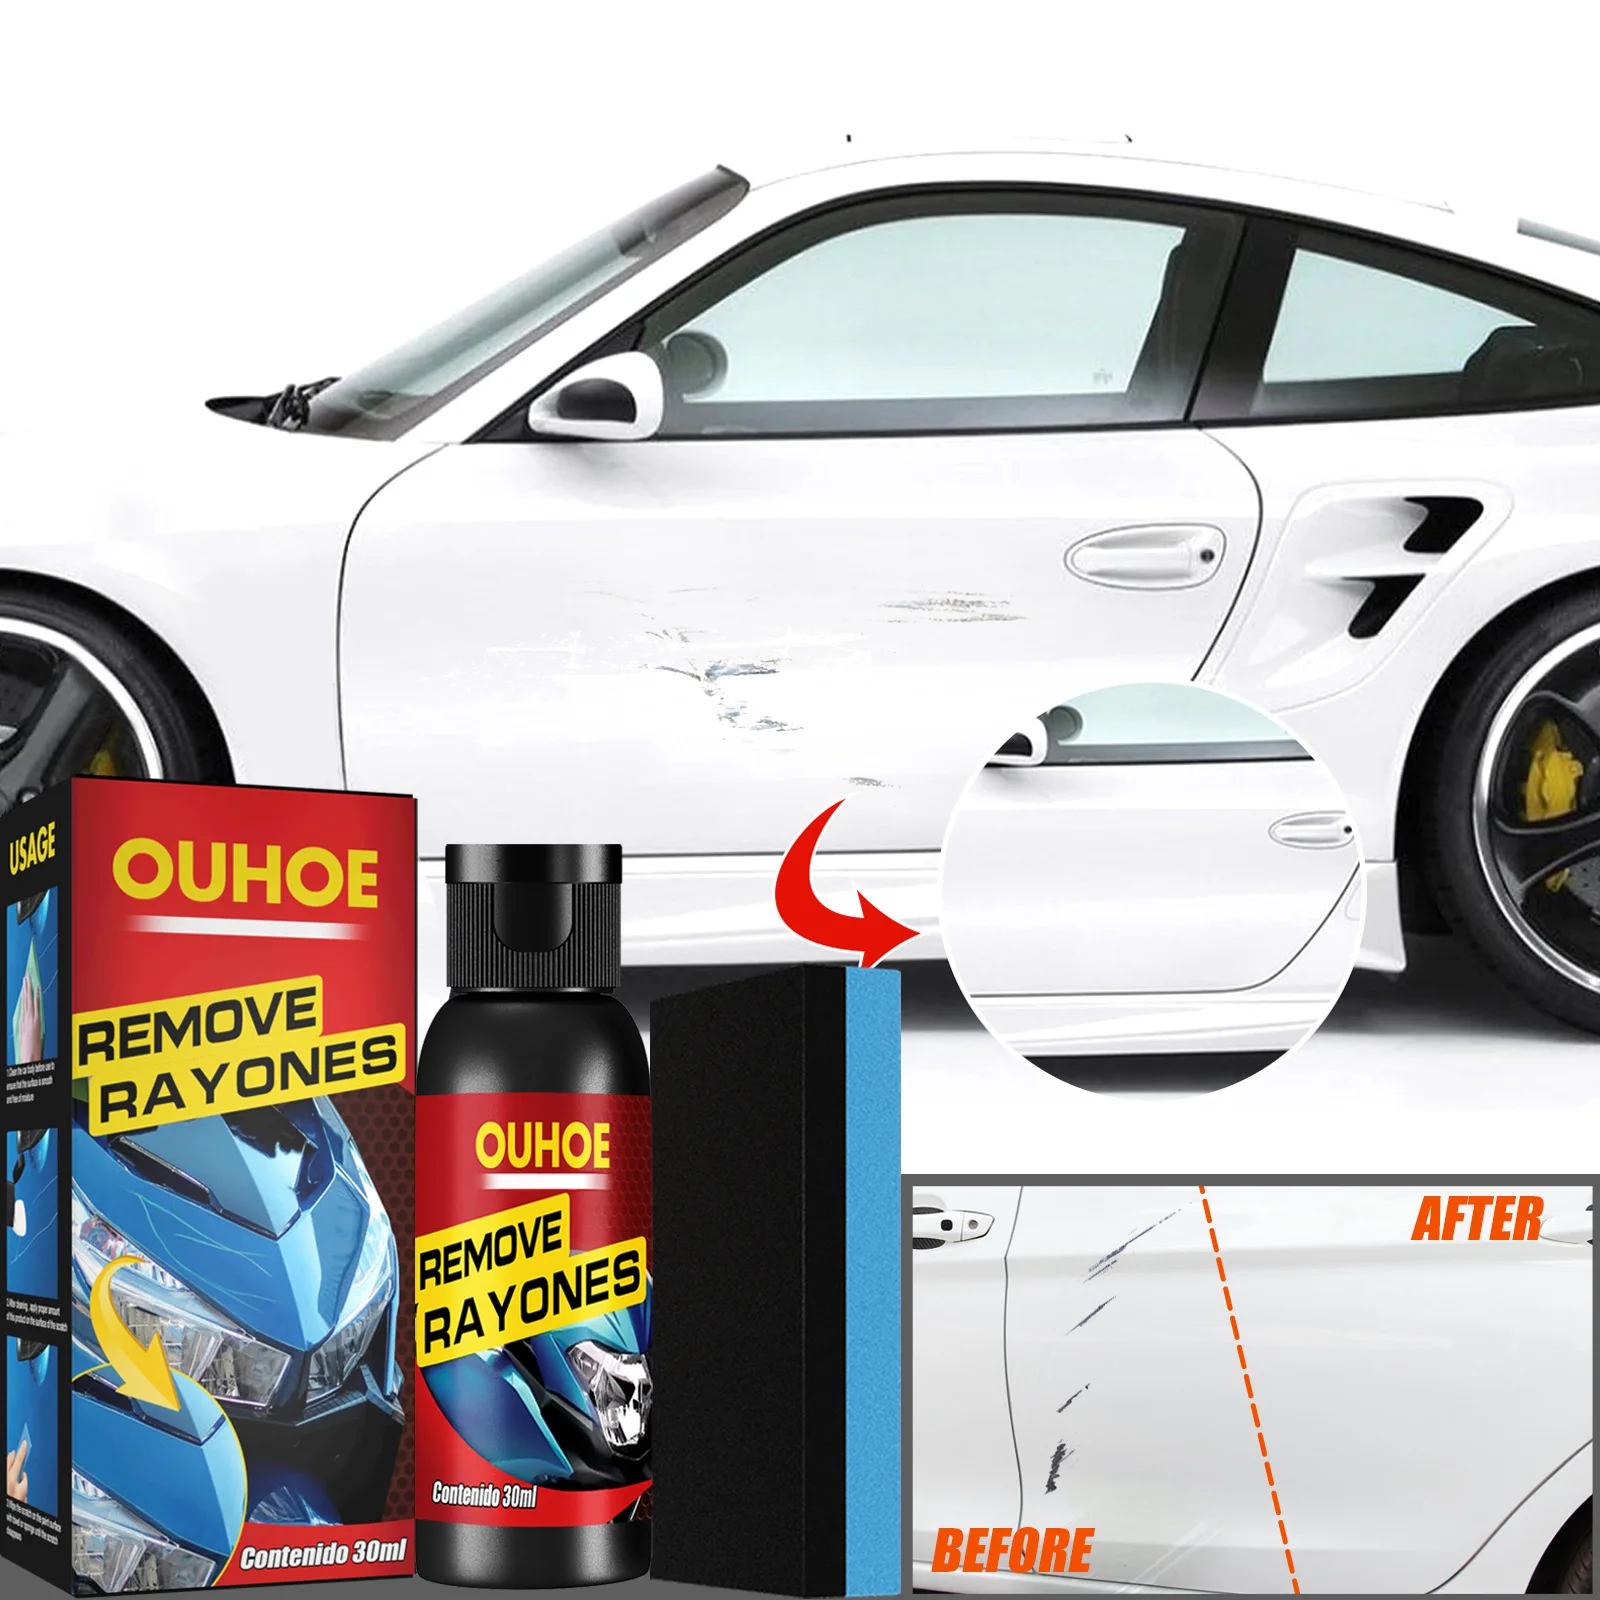 Car Paint Scratch Repair Wax Polishing Kit Scratch Repair Agent Scratch Remover Paint Care Auto Styling Car Polish Cleaning Tool premium car scratch repair fluid car paint scratch repair maintenance renovation cleaning and polishing coating agent